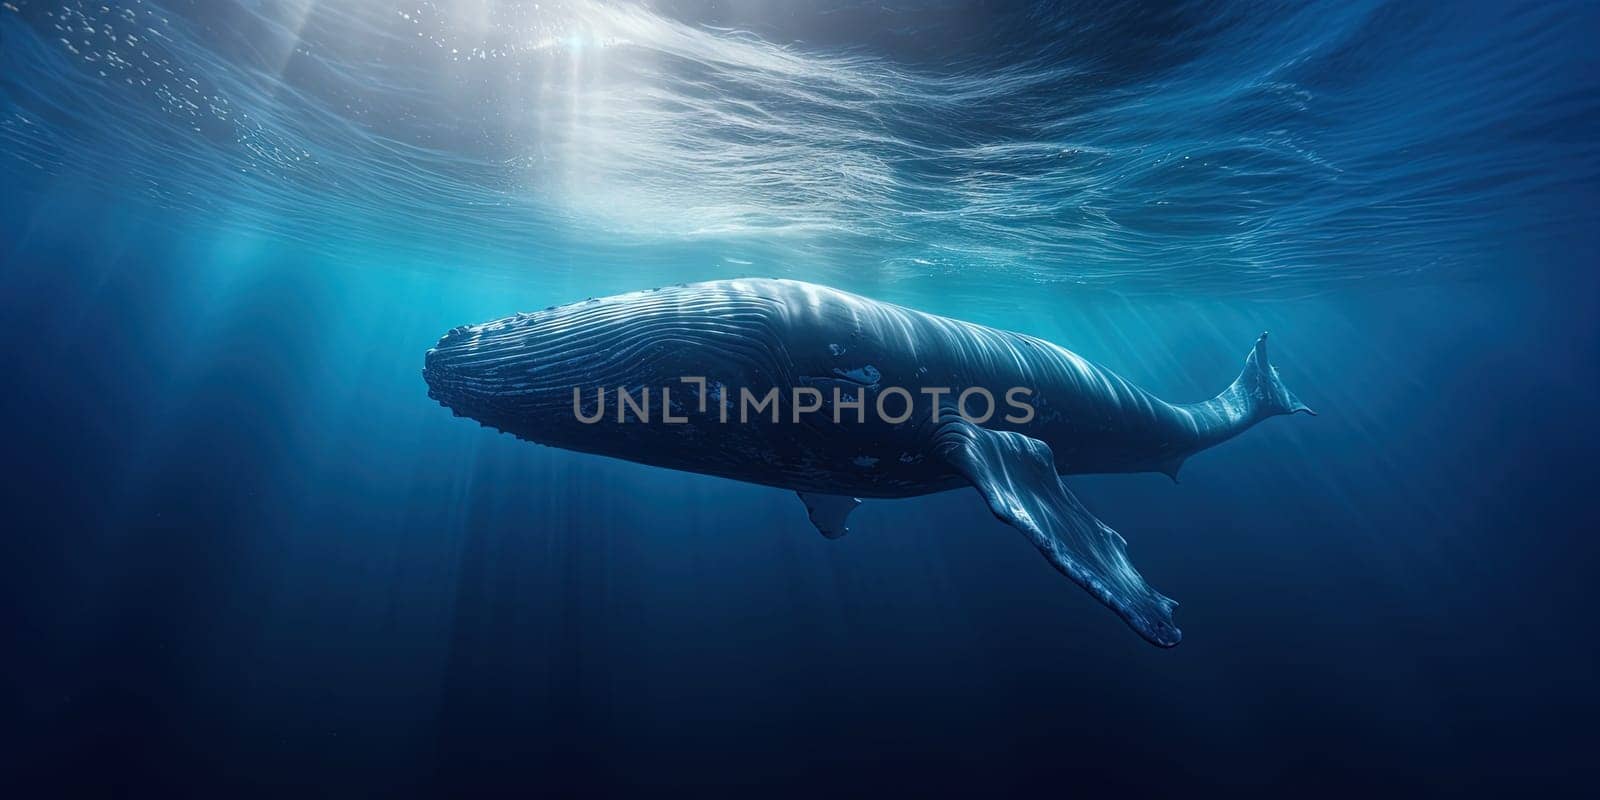 big blue whale in the ocean near the surface of wate by tan4ikk1